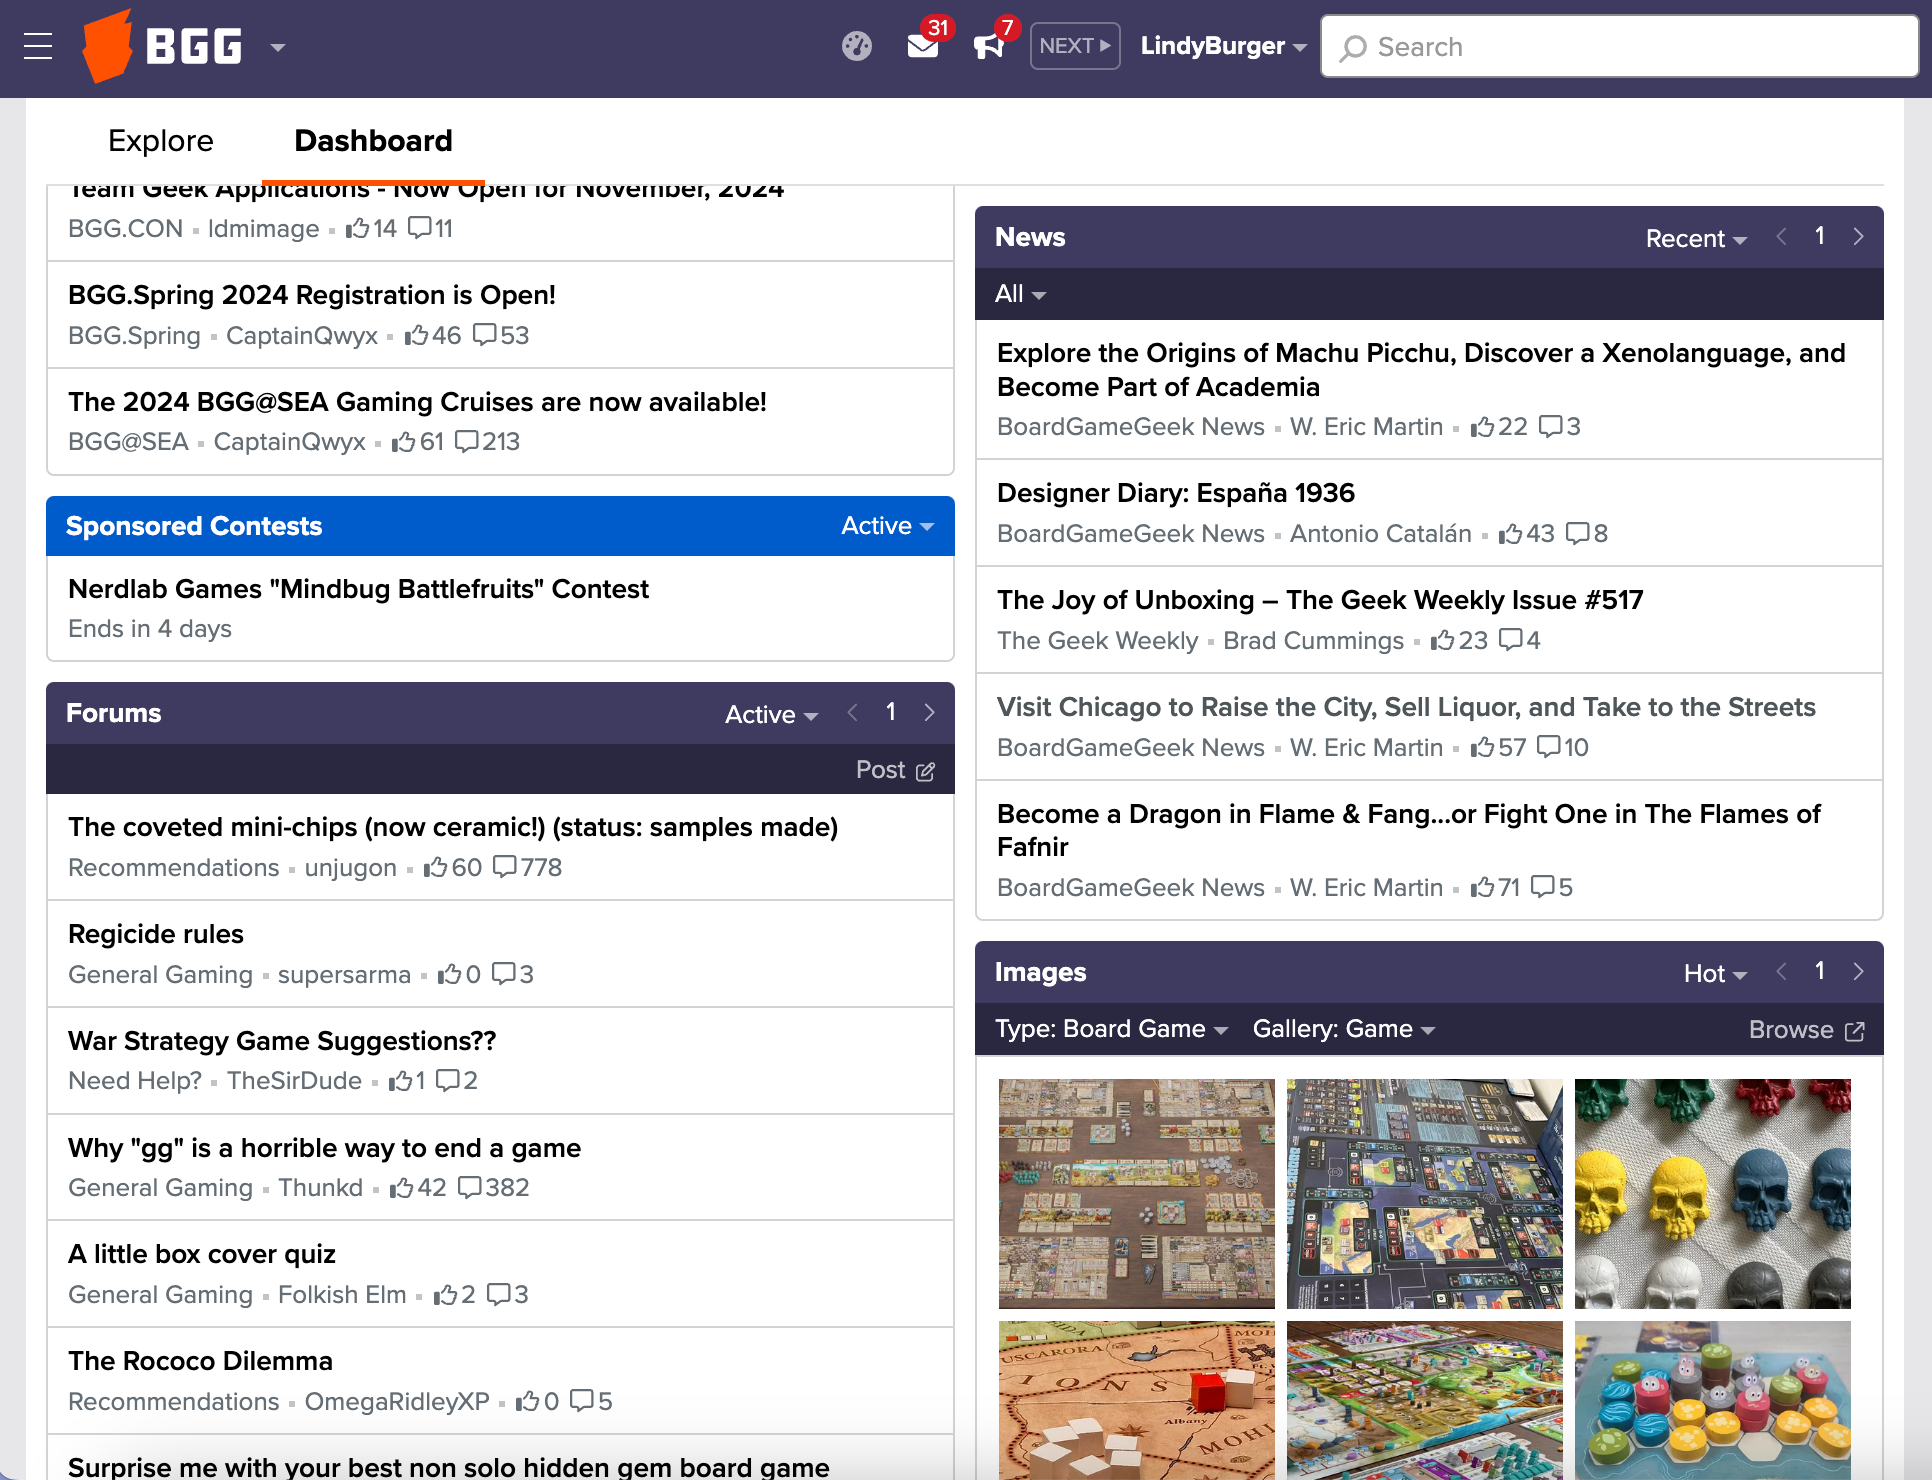 A screenshot of the dashboard of boardgamegeek.com, displaying groups of topics like "Forums", "Images", and "News".